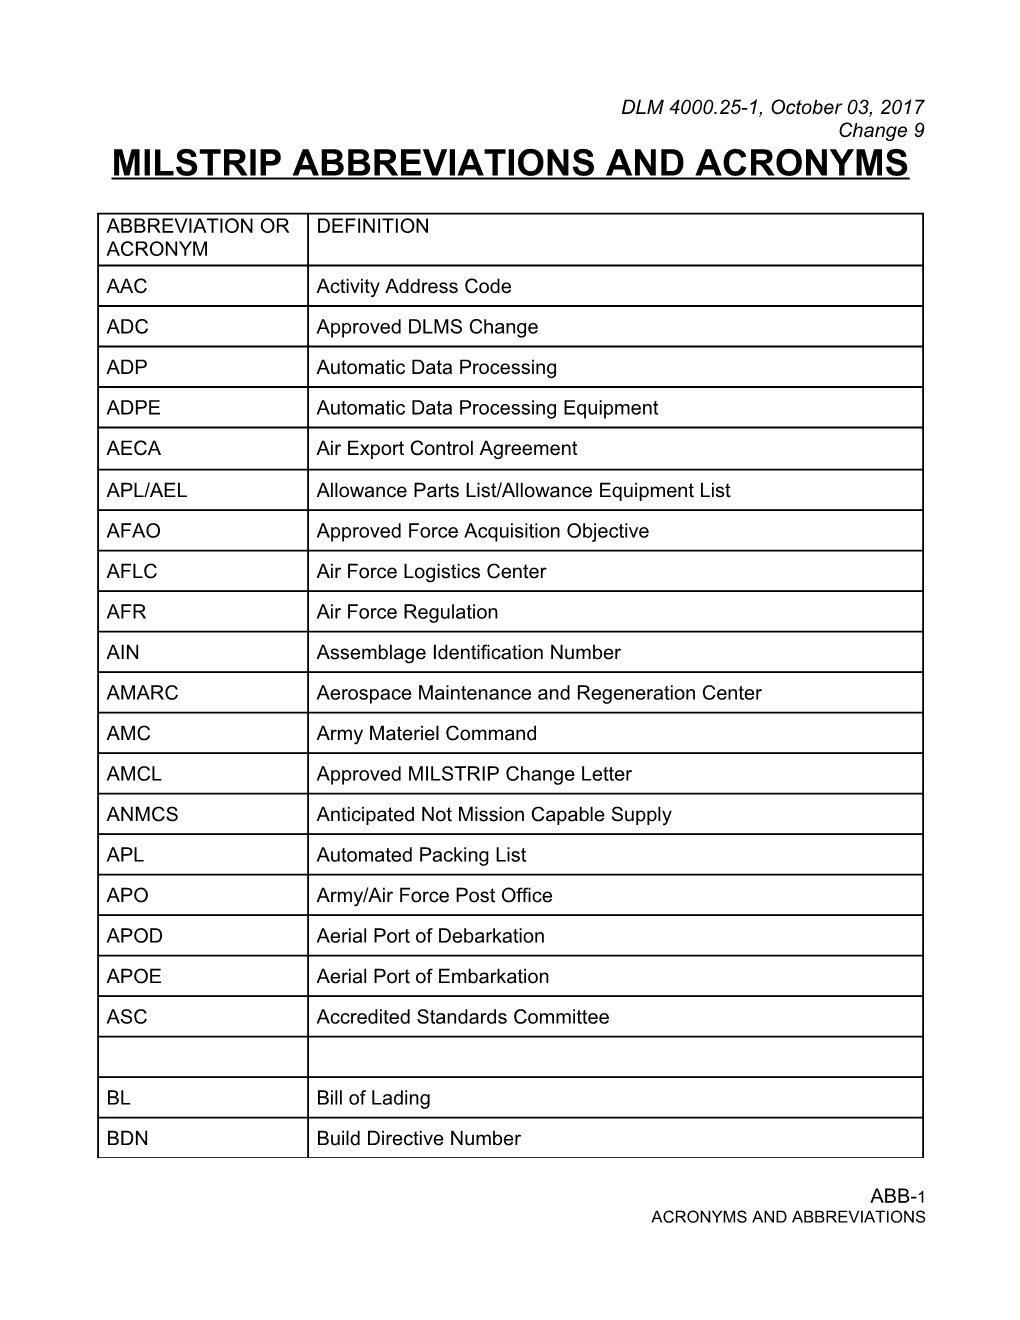 MILSTRIP Abbreviations and Acronyms